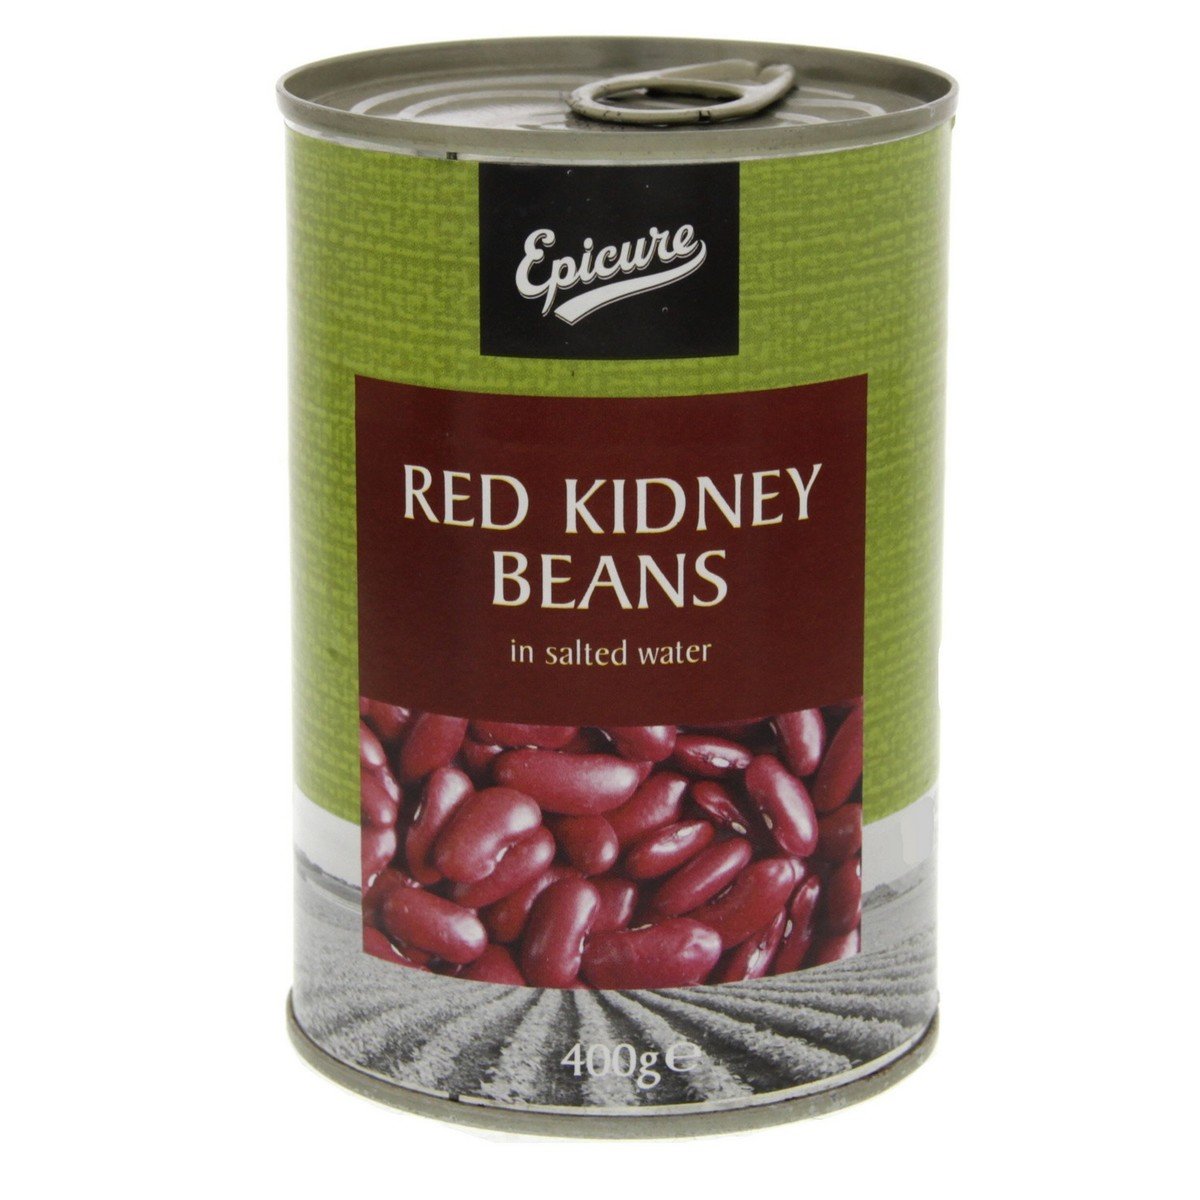 Epicure Red Kidney Beans in Salted Water 400 g